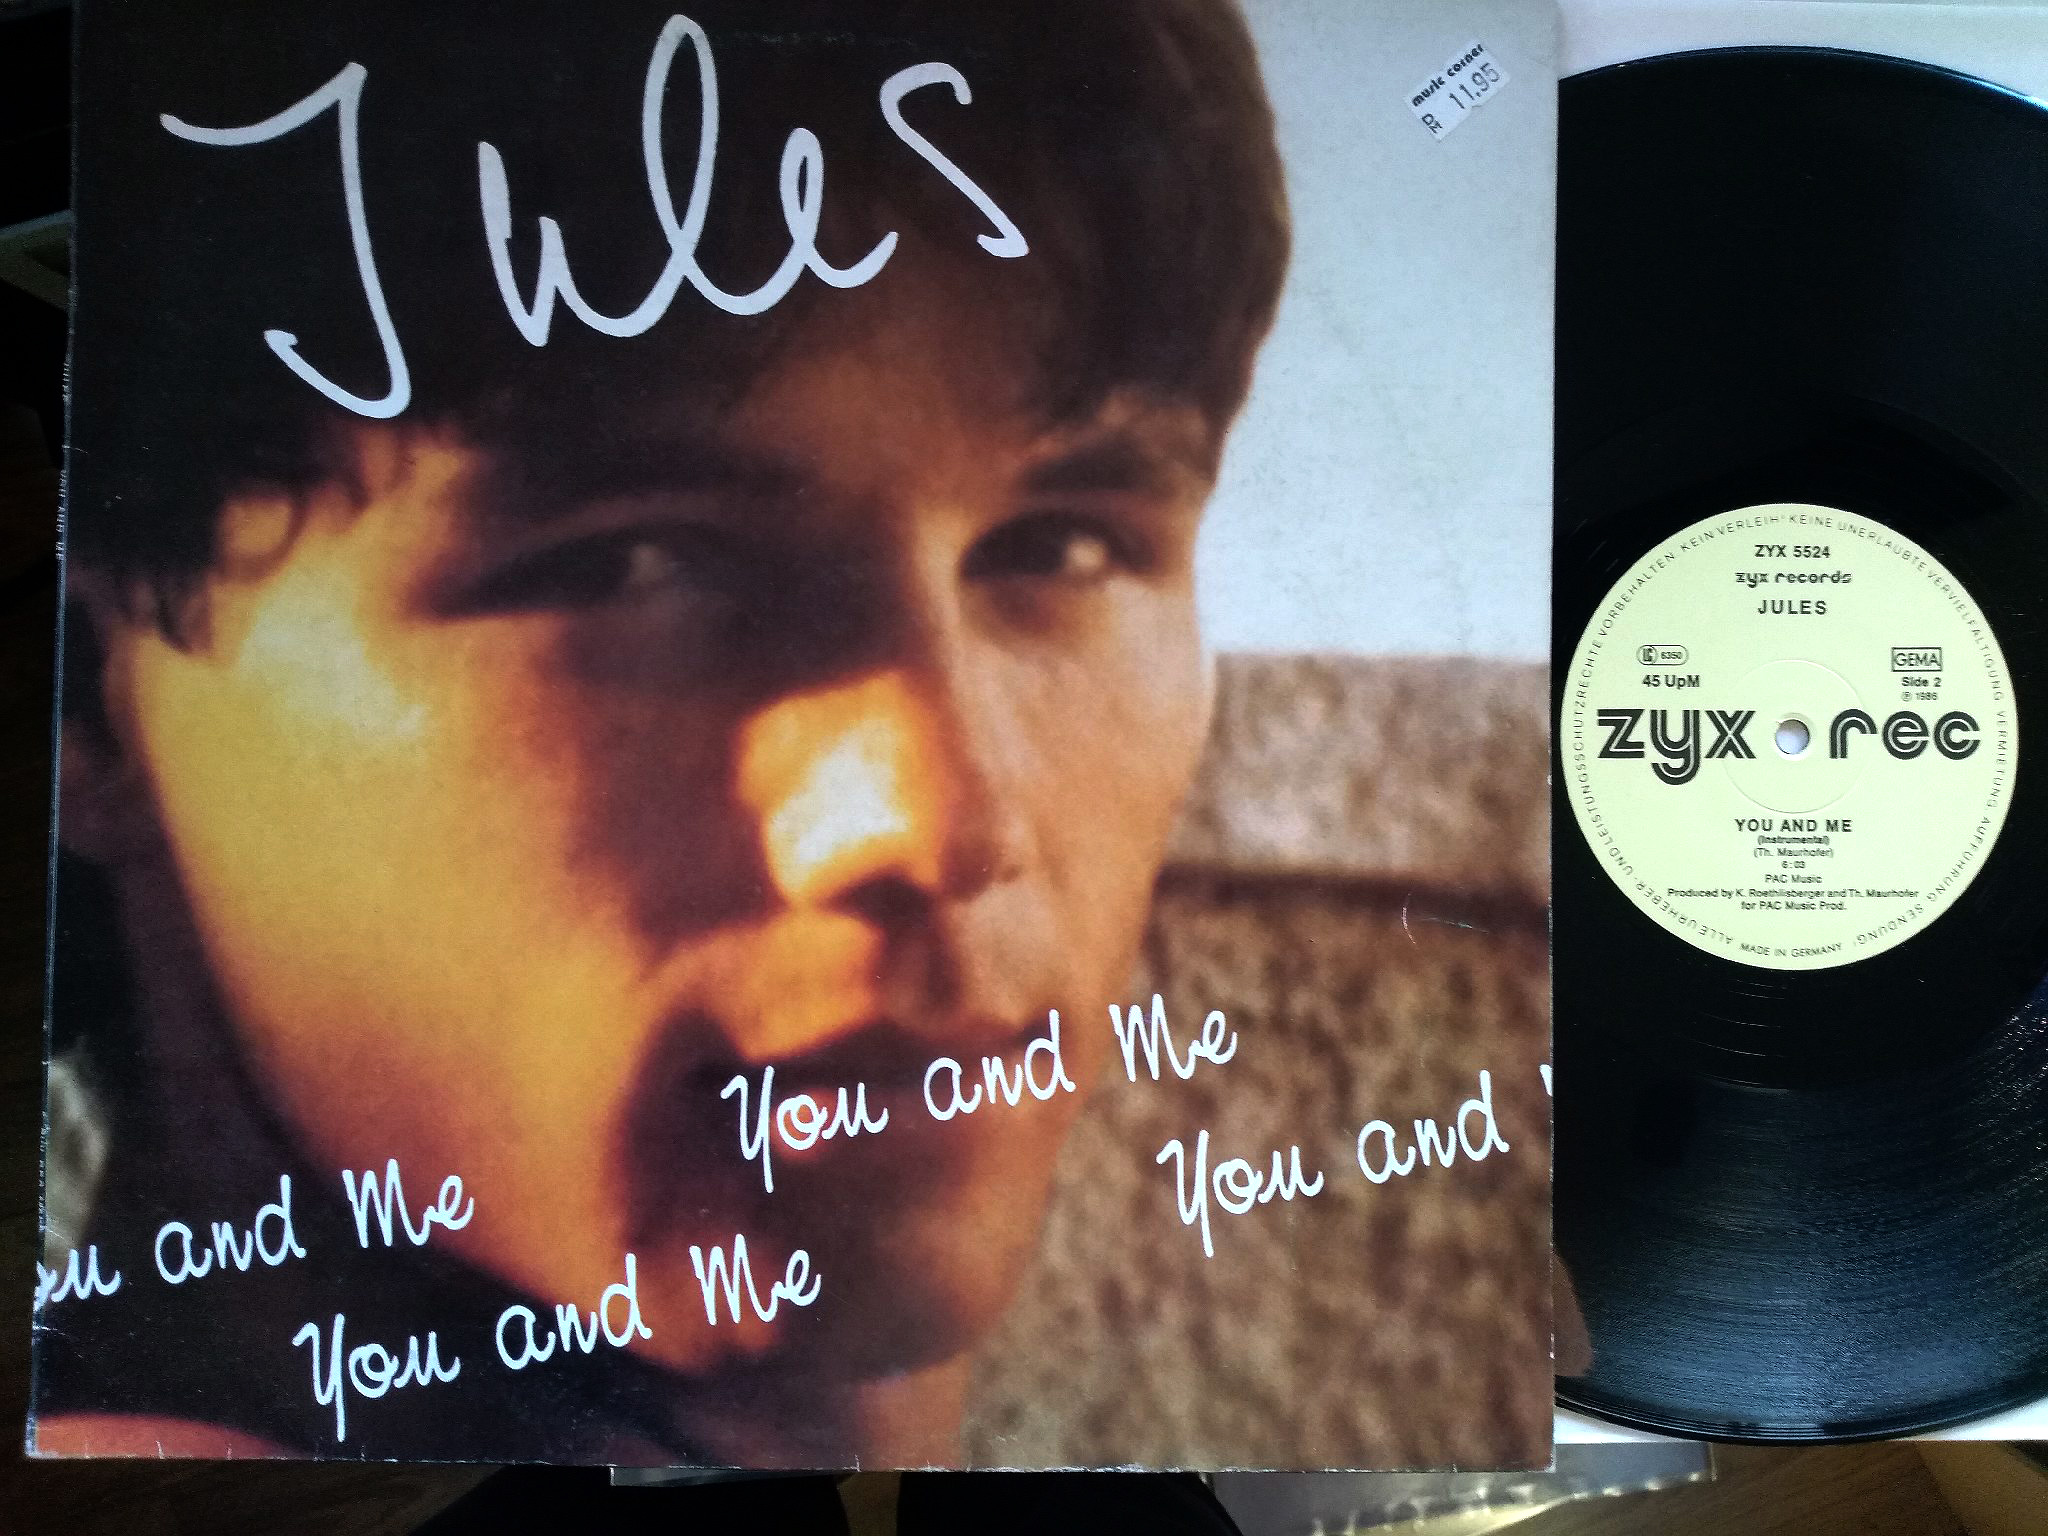 Jules - You and me